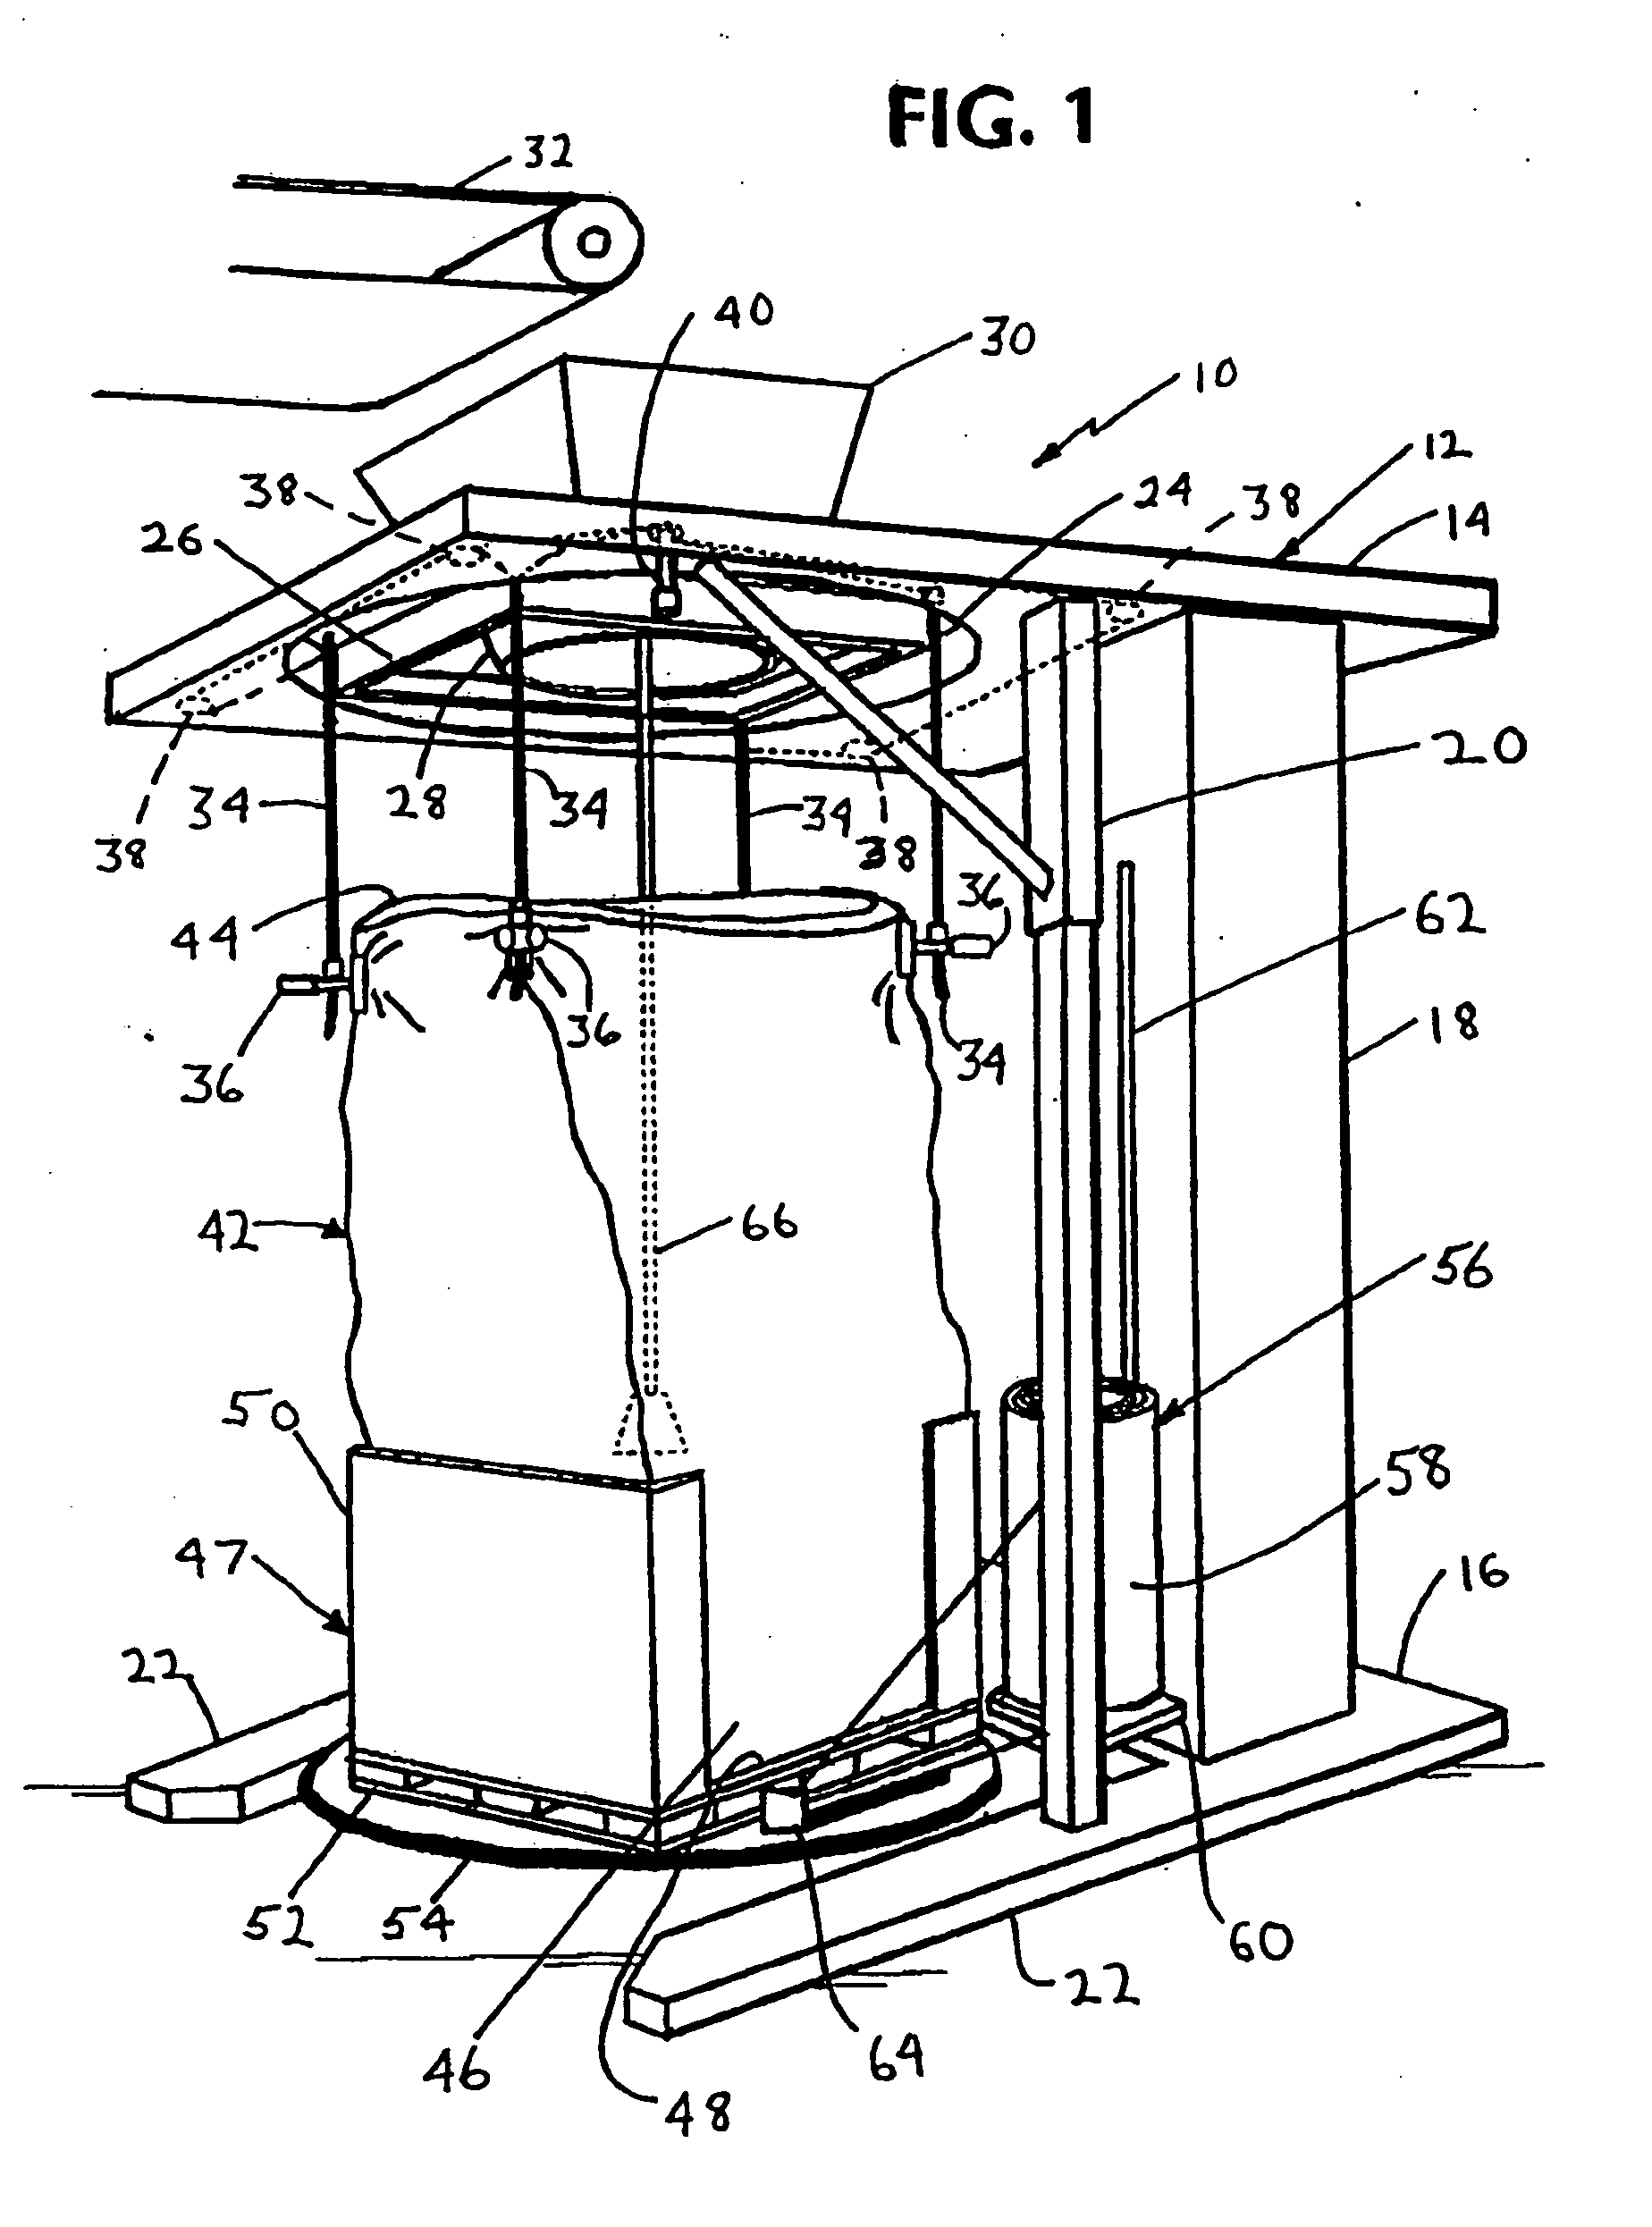 Method for forming a transportable container for bulk goods